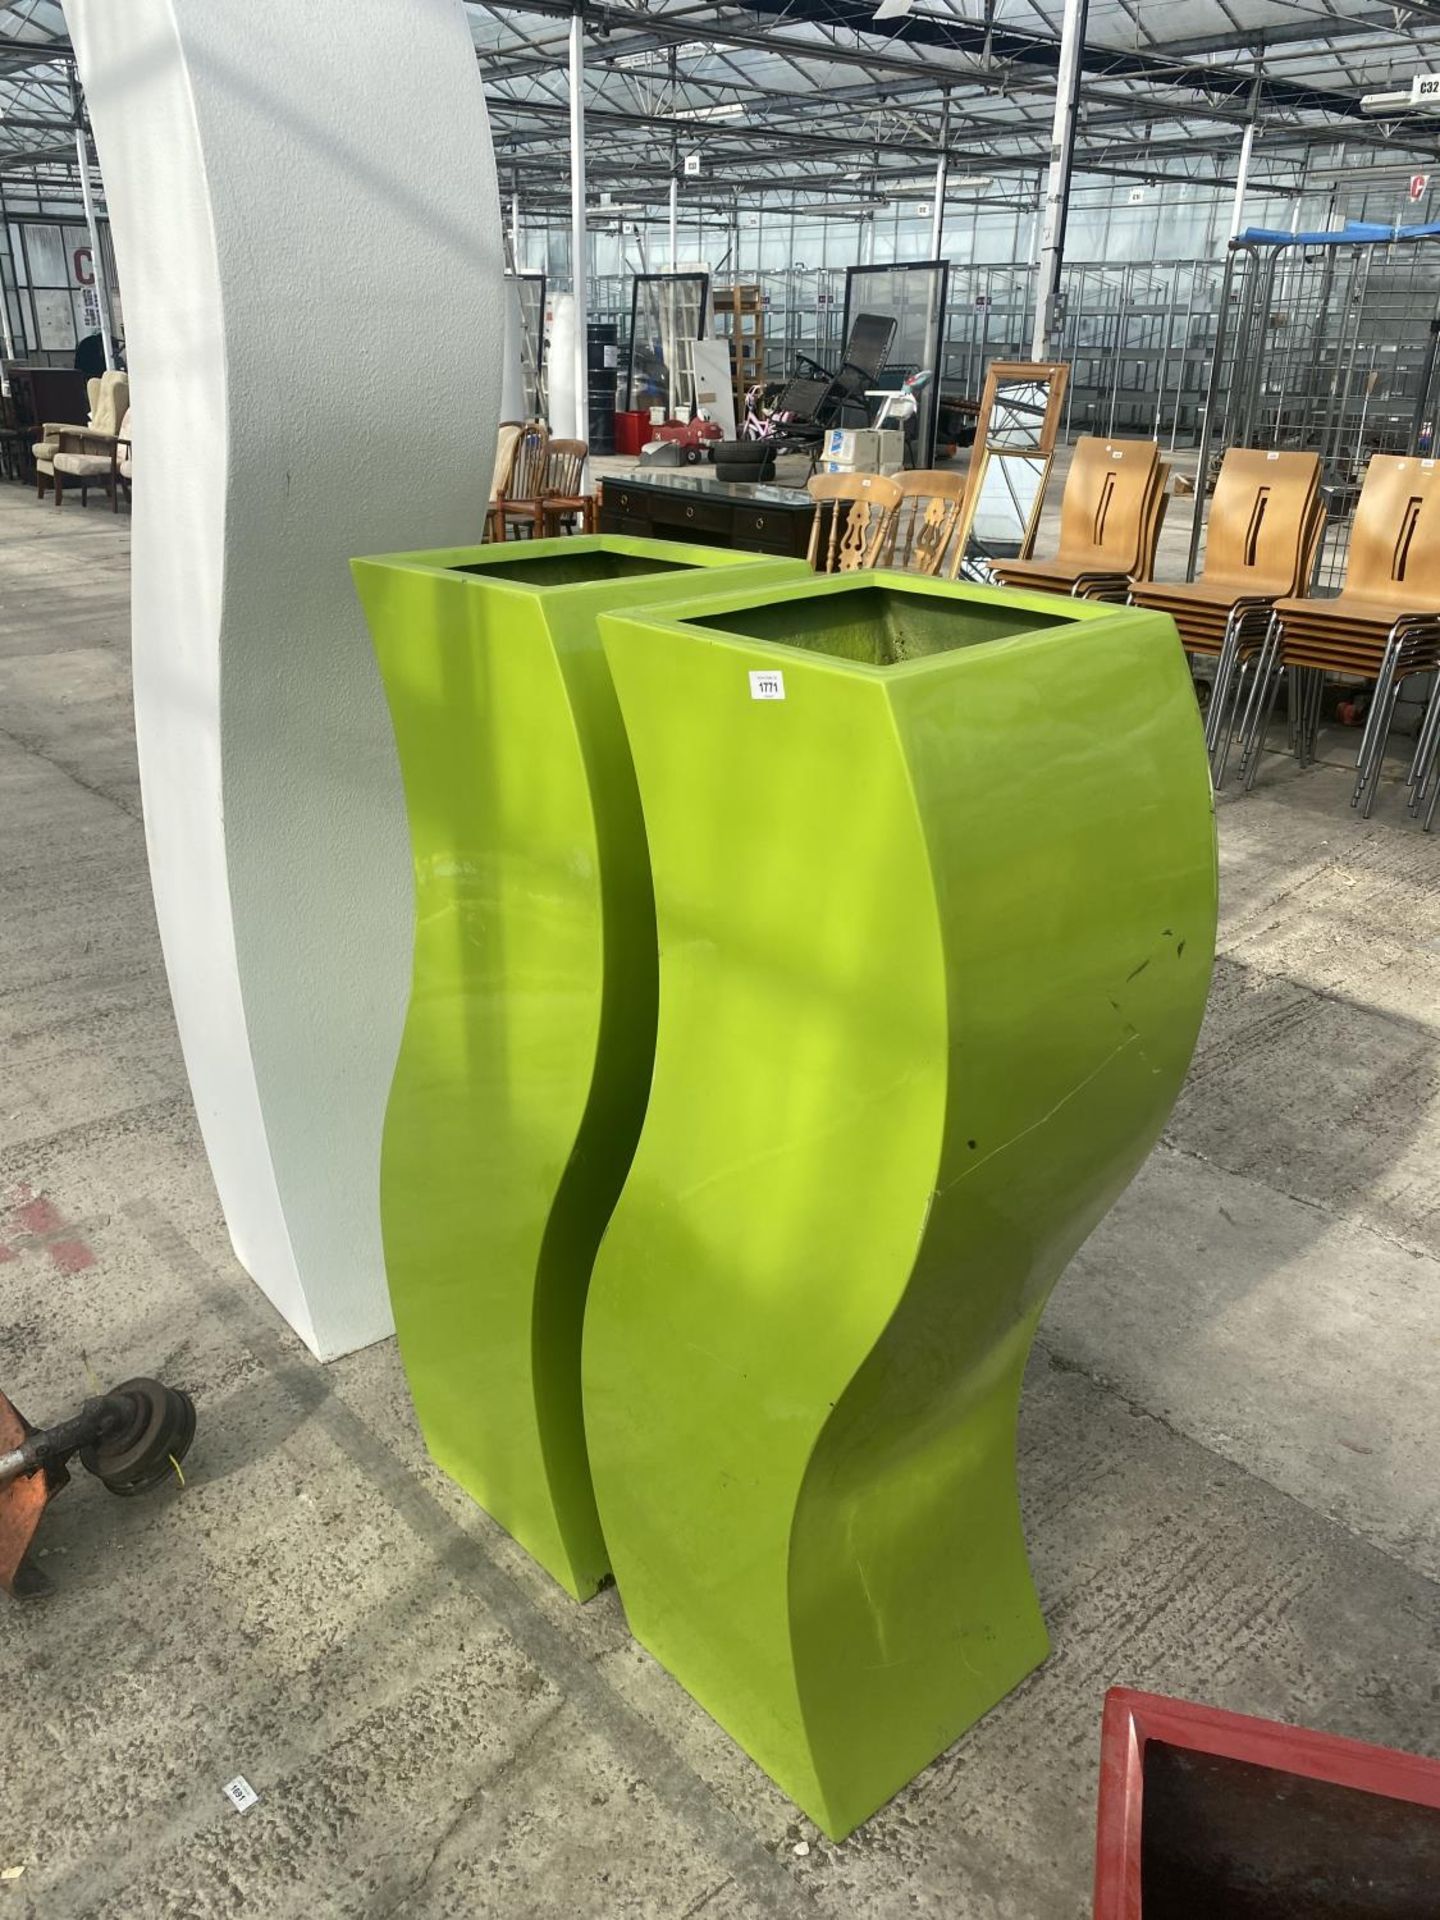 A PAIR OF UNUSUAL TALL AND CURVED DECORATIVE GREEN PLASTIC PLANTERS (H:120CM) - Image 5 of 5